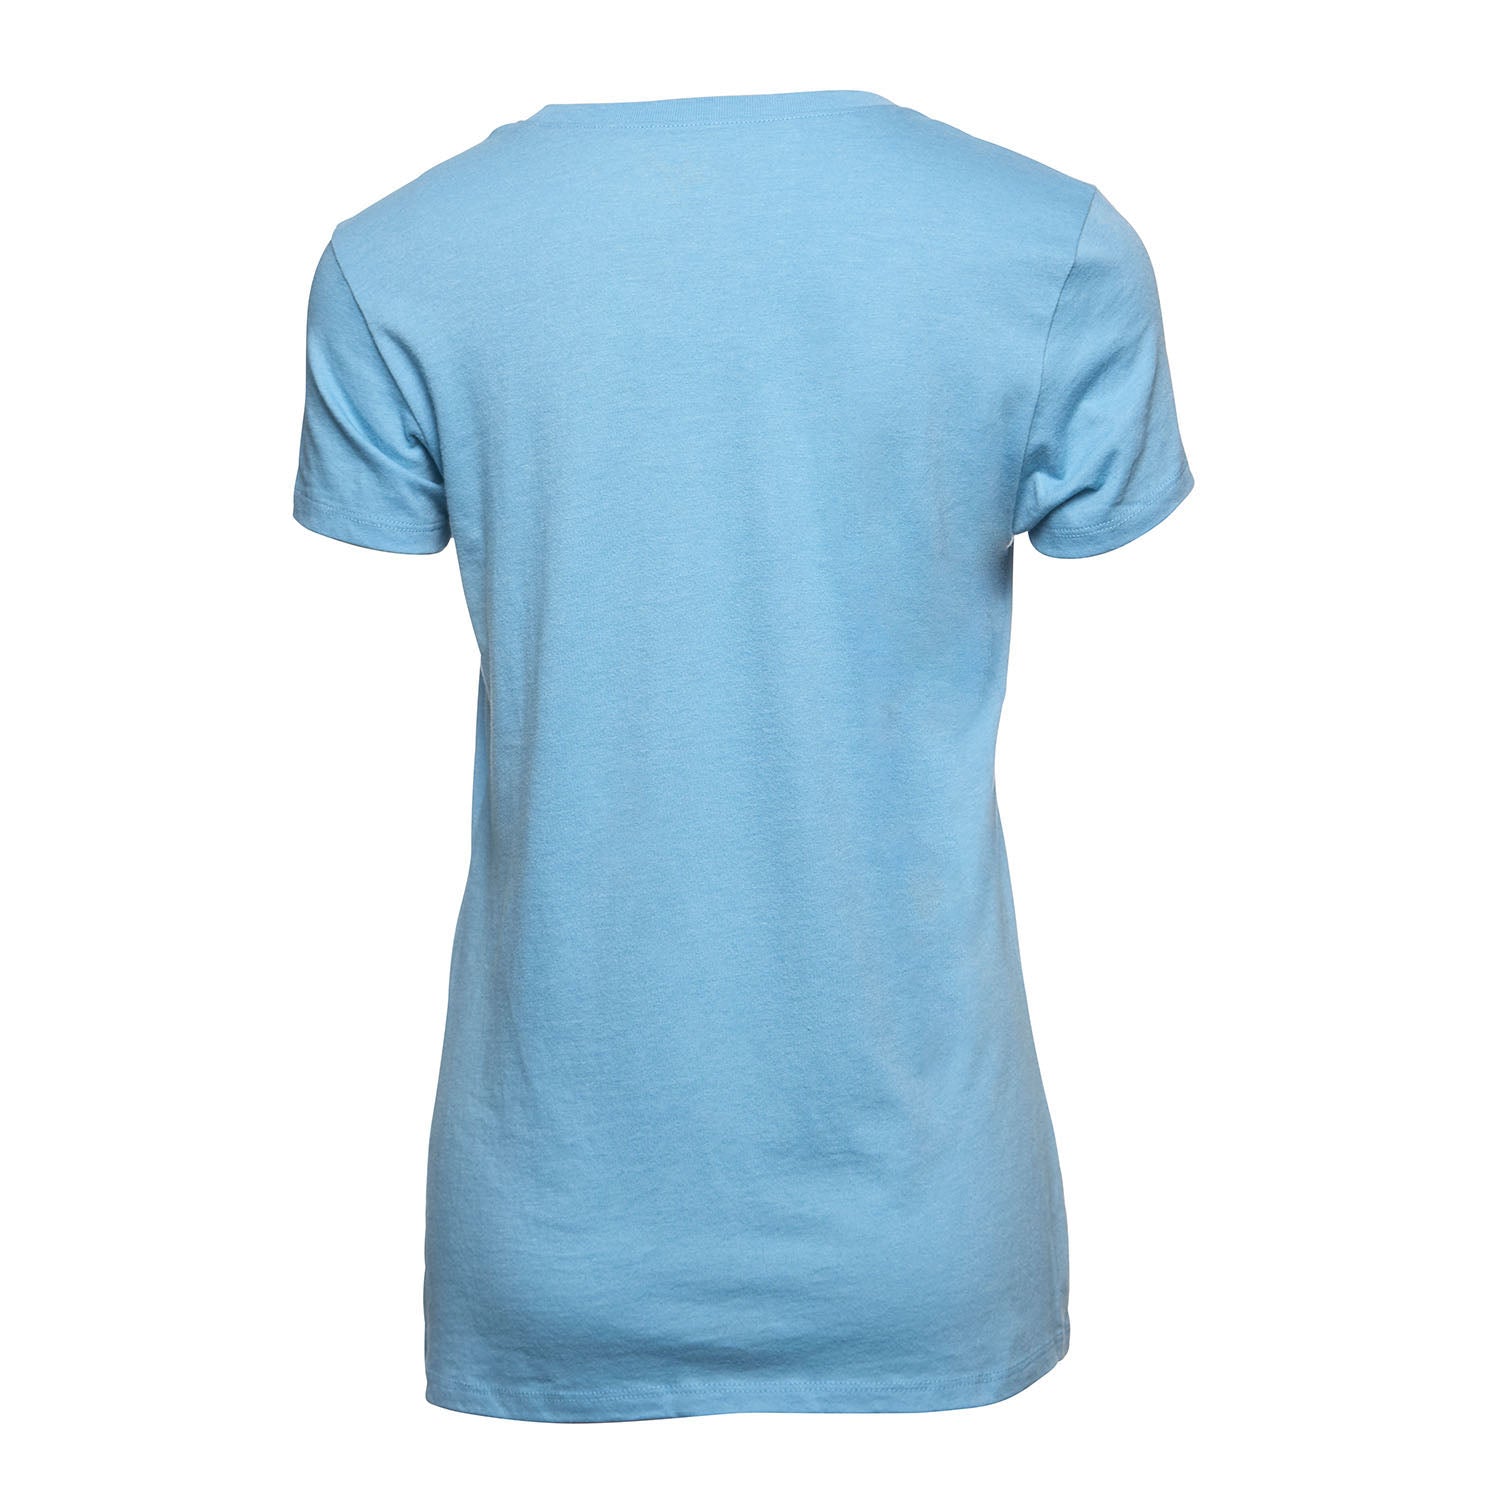 47 Brand Women's Imprint Club Scoop Neck T-Shirt in Blue- Front View